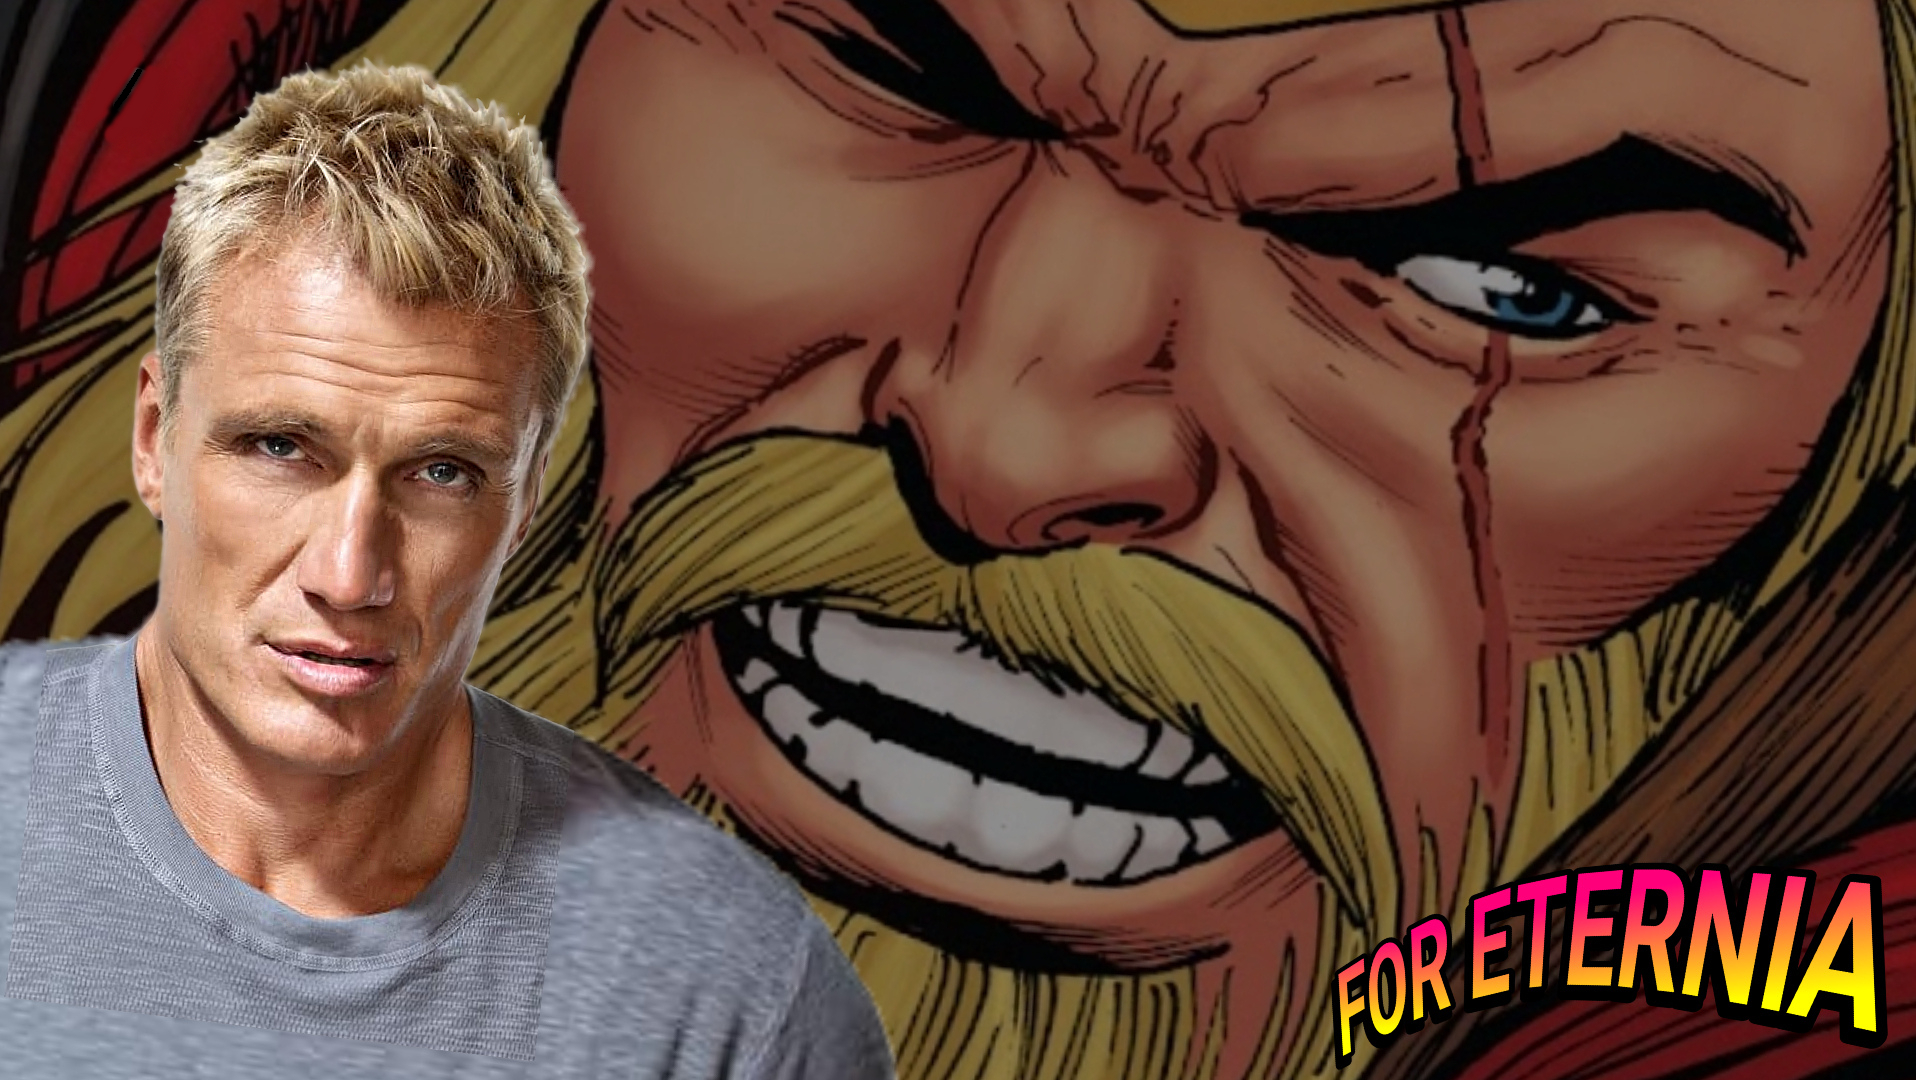 Actor Dolph Lundgren is asked would he consider returning as an older He-Man